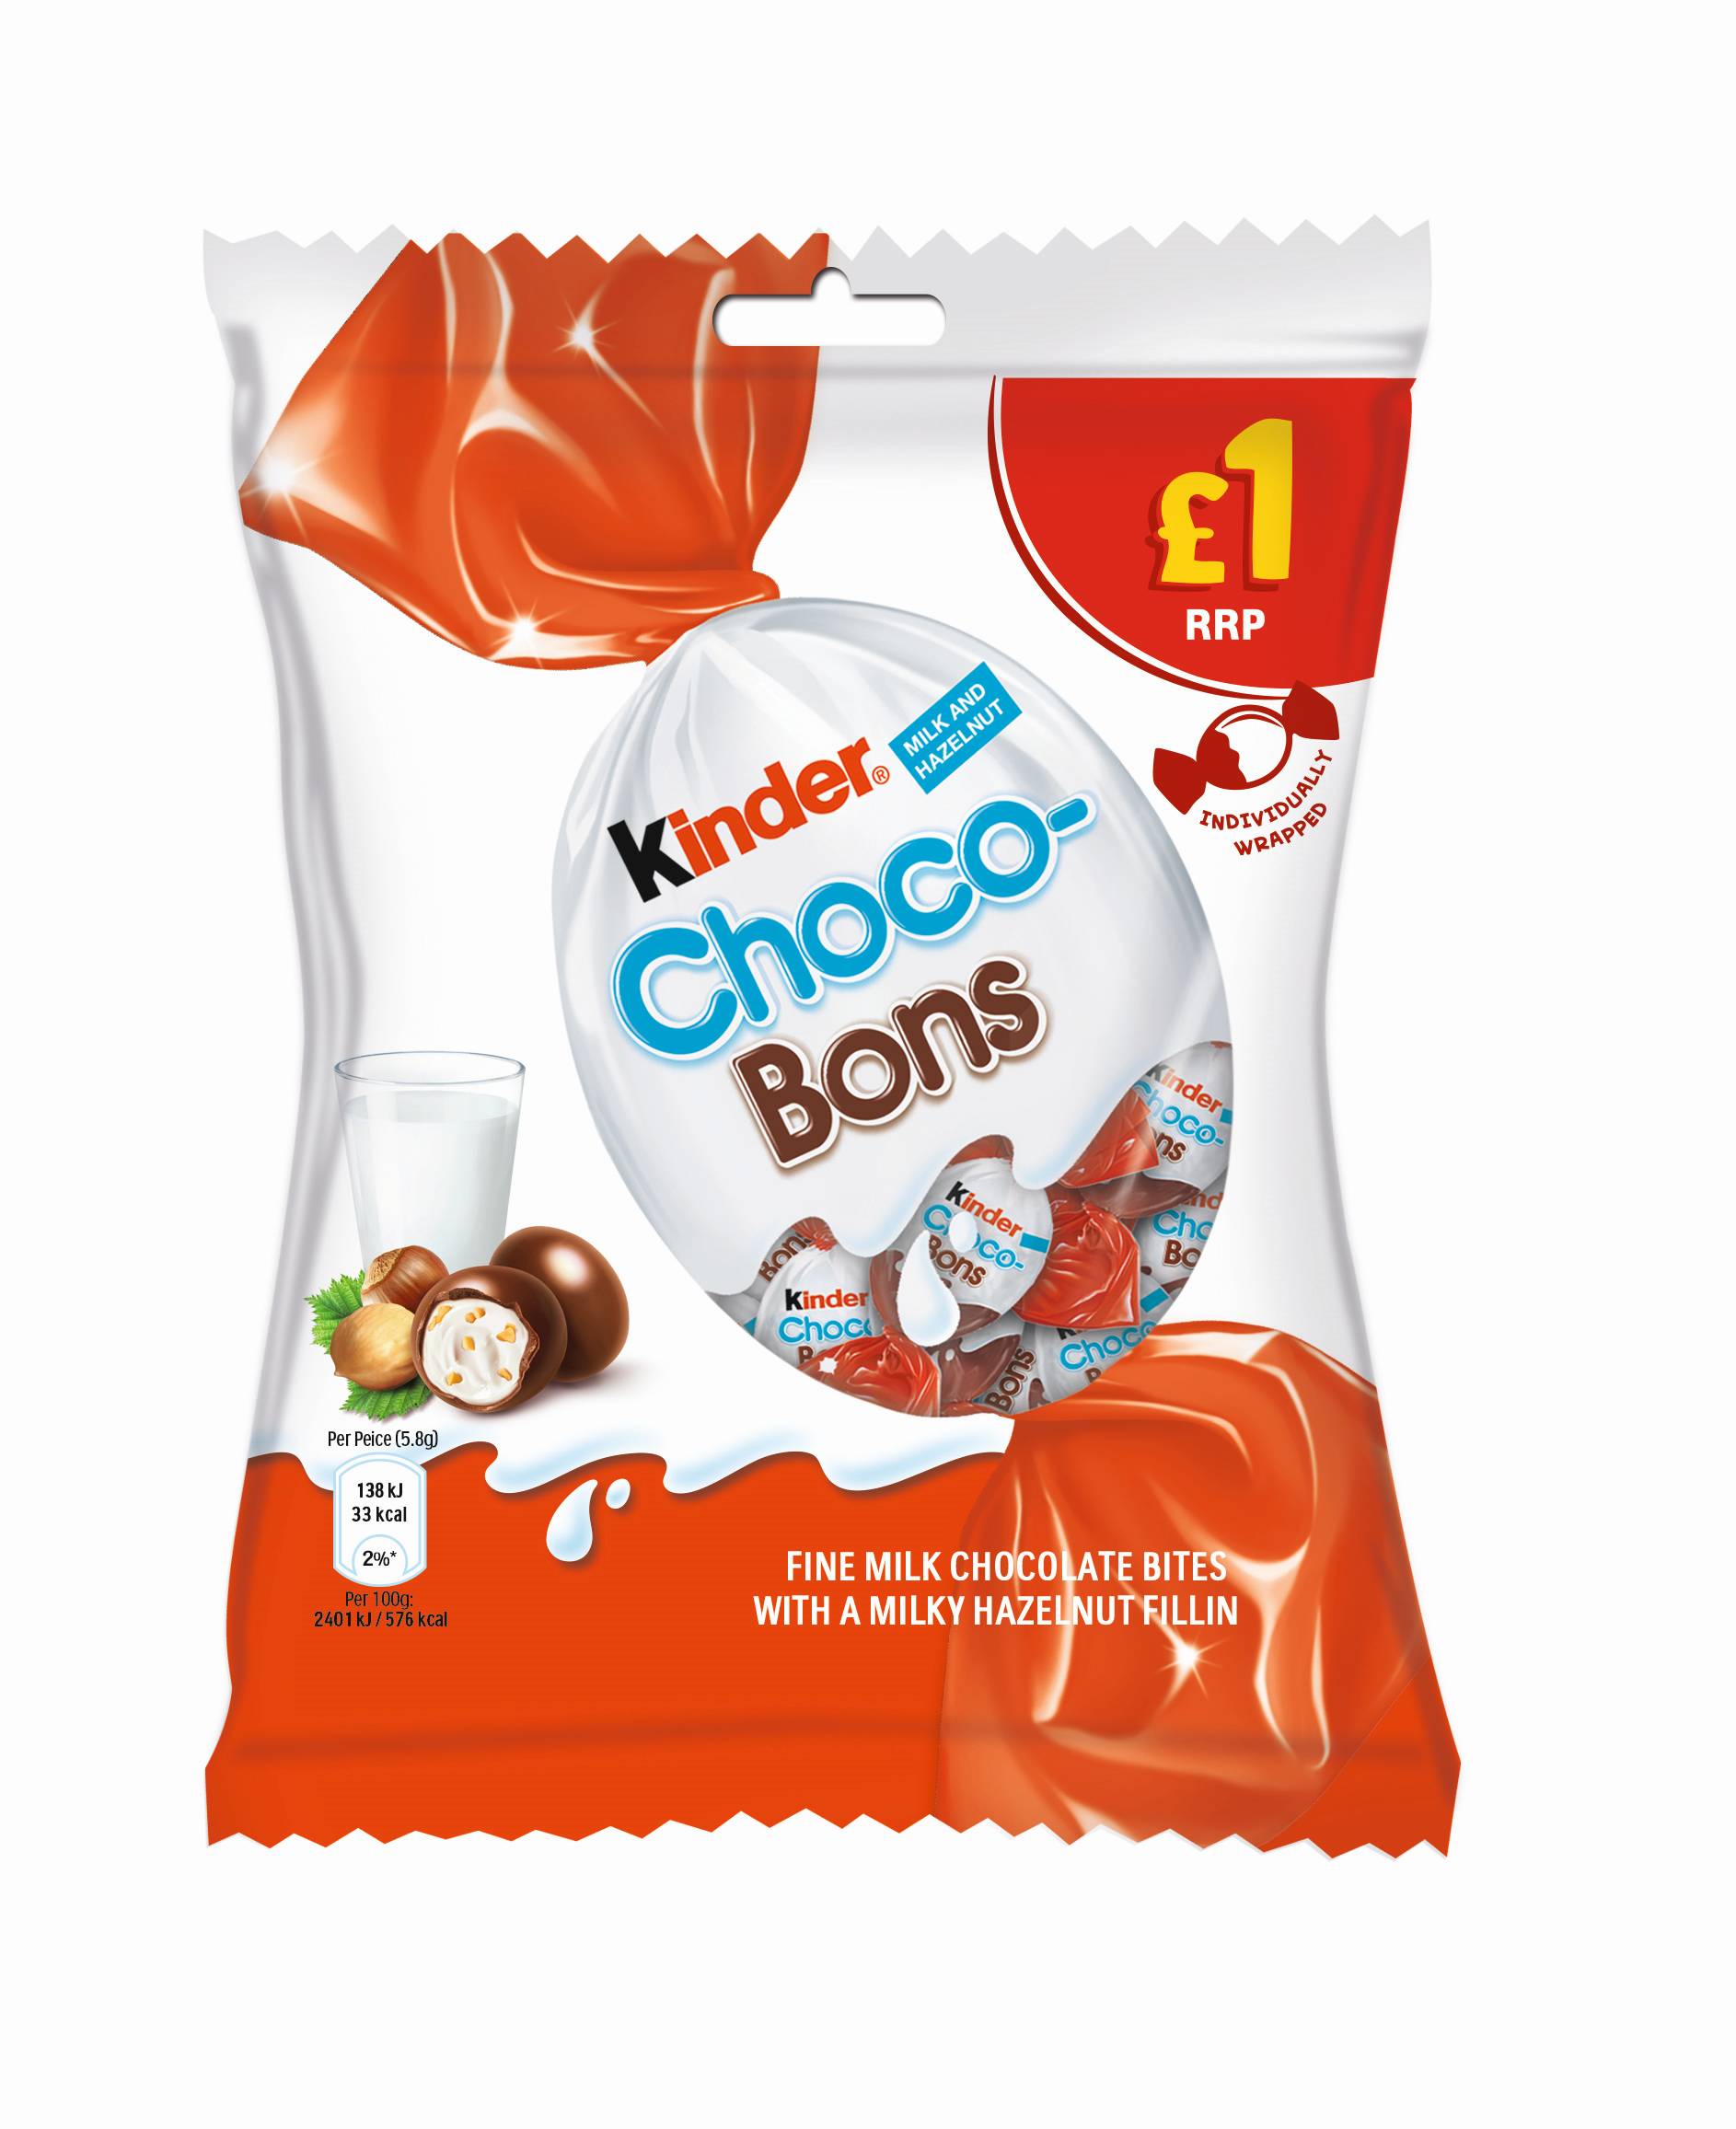 New PMP sharing range from Kinder